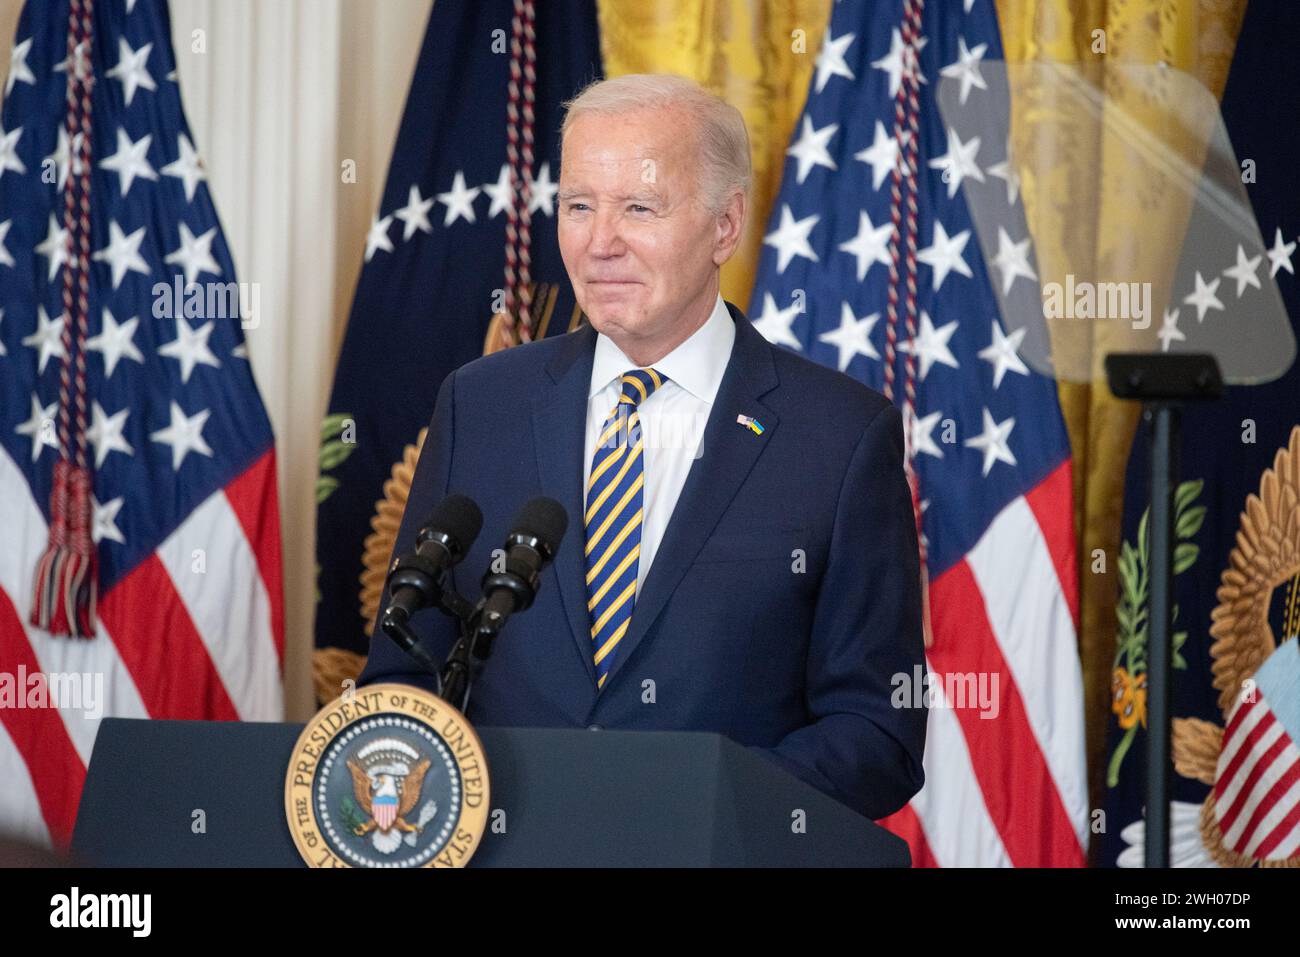 United States President Joe Biden delivers remarks at the Black History Month Reception at the White House in Washington, DC on Tuesday, February 6, 2024.Credit: Annabelle Gordon/Pool via CNP/MediaPunch Stock Photo